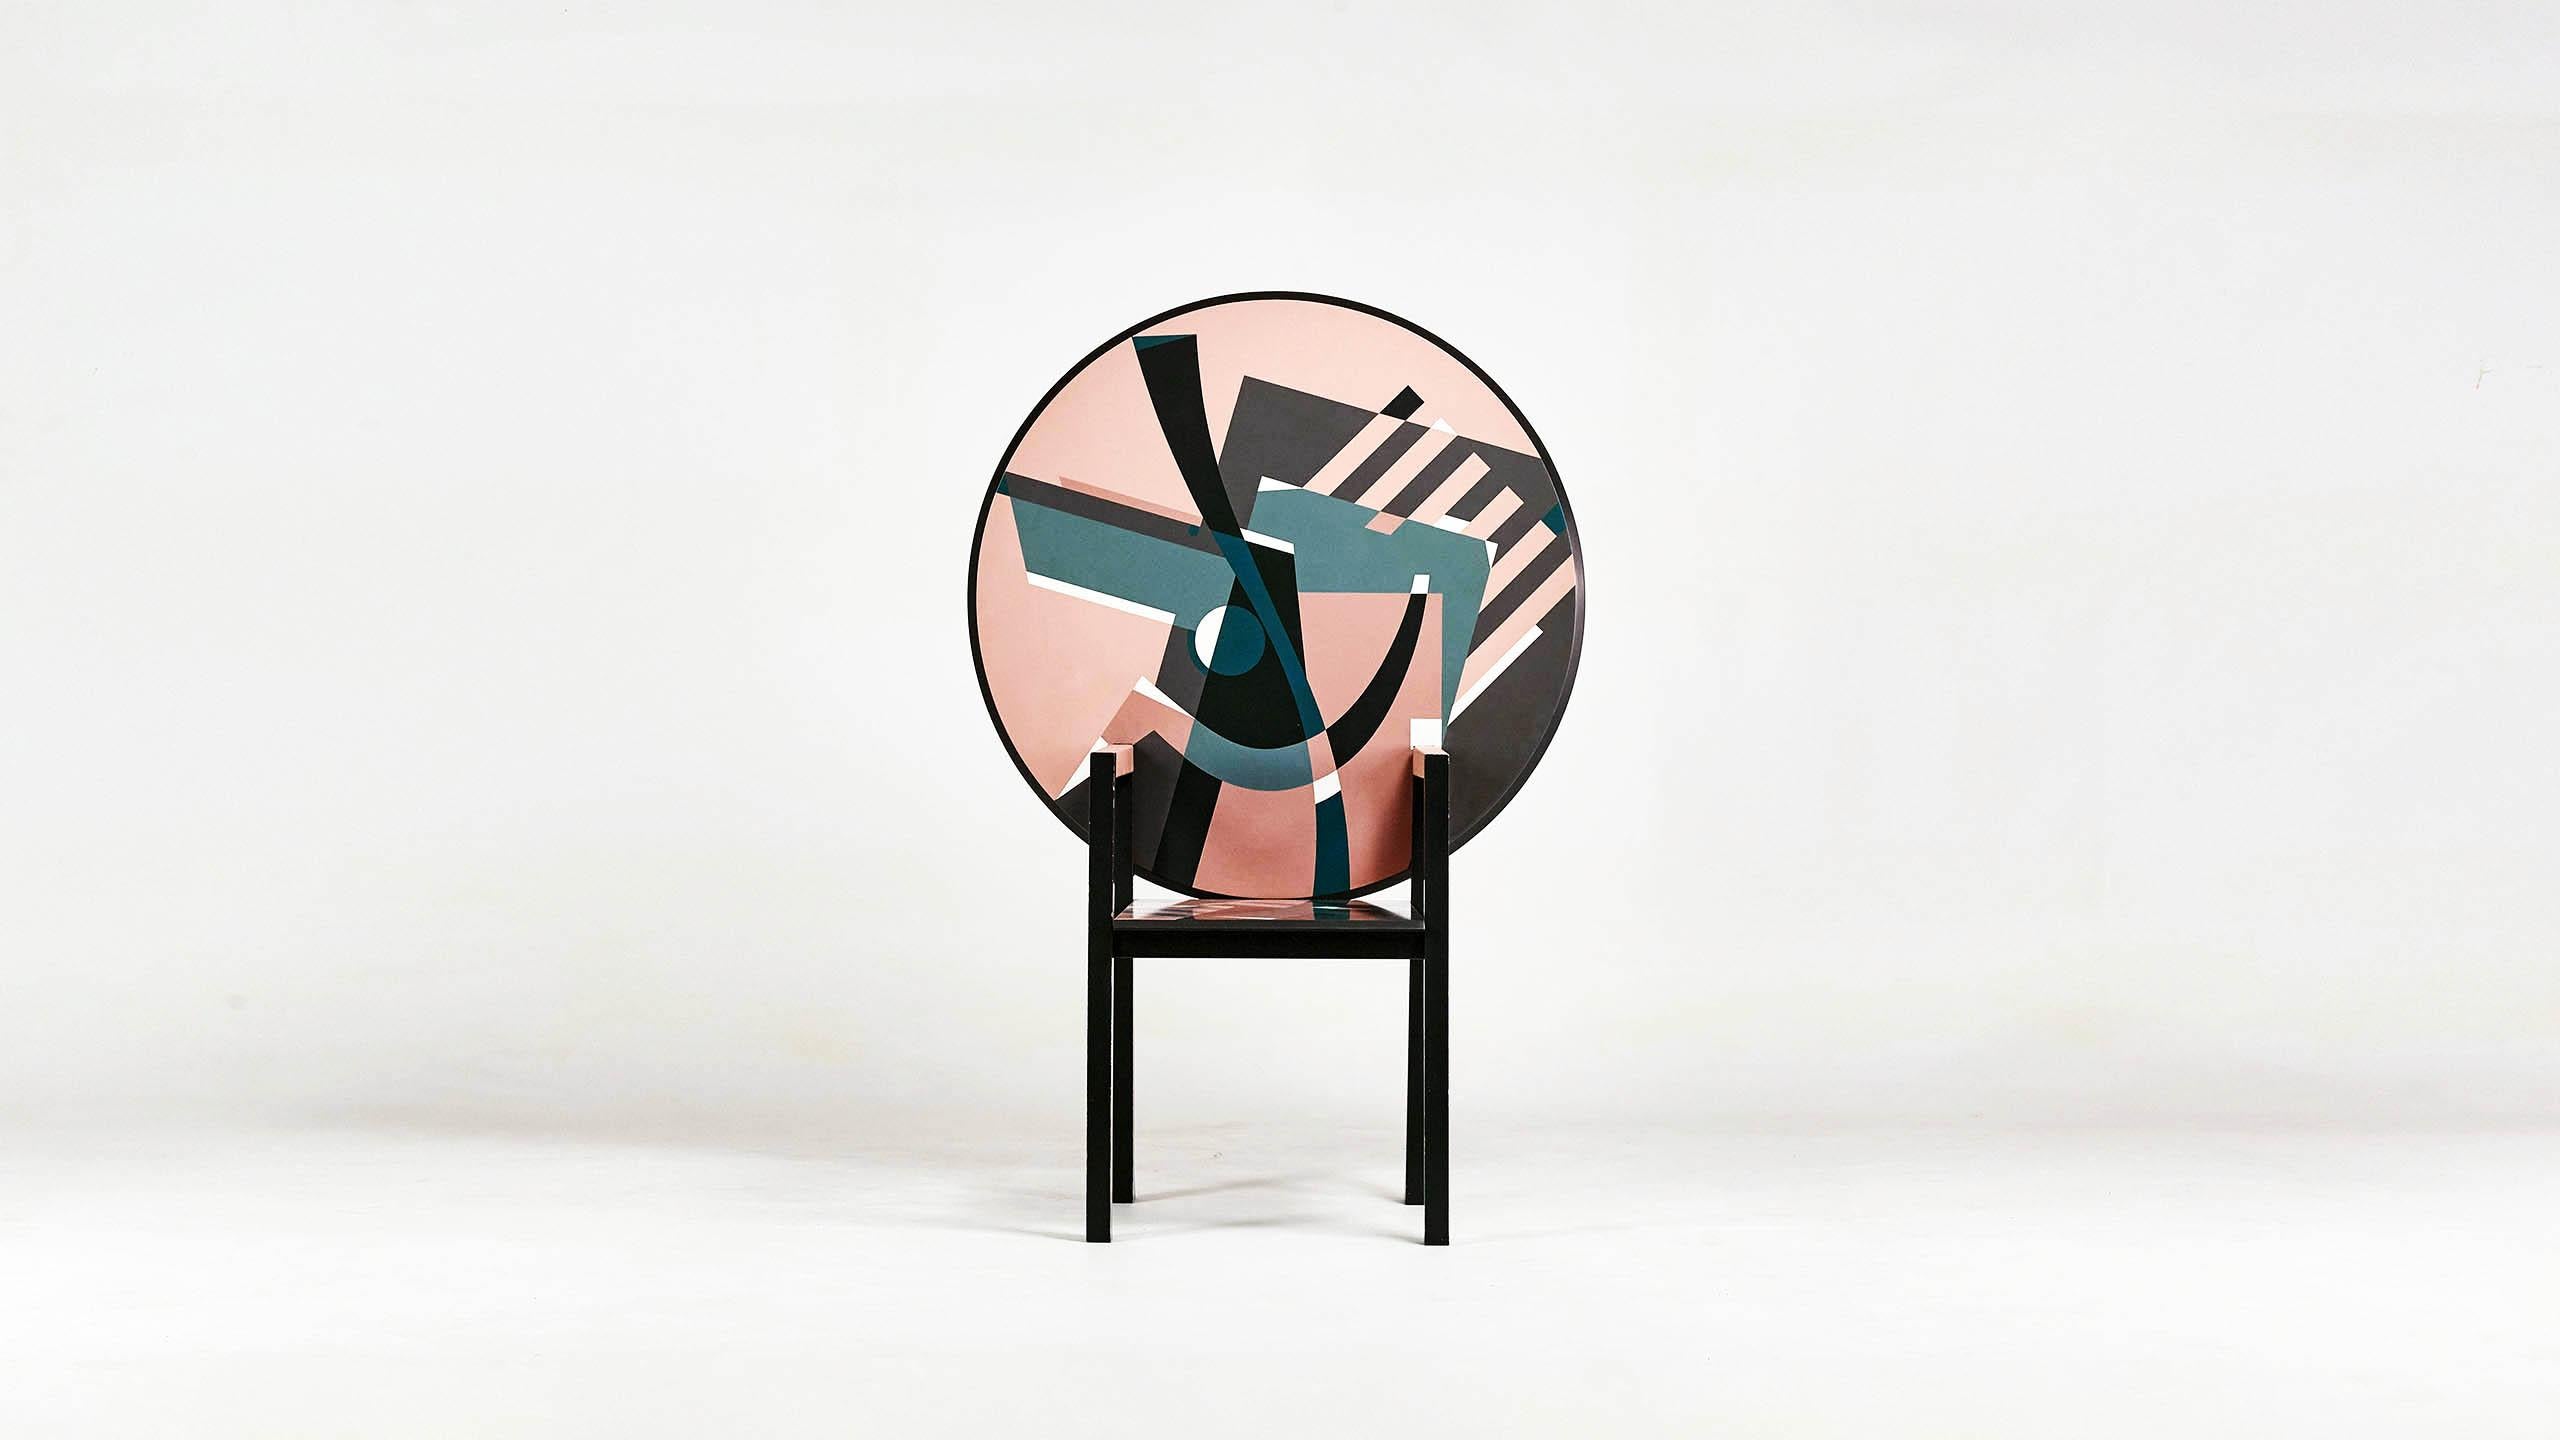 Zabro chair, by Italian master designer Alessandro Mendini for Zanotta. Particularly interested in radical design and post-modernism, Alessandro Mendini designed Zabro in 1984, a chair that turns ... into a table! 

The Zabro chair is above all a